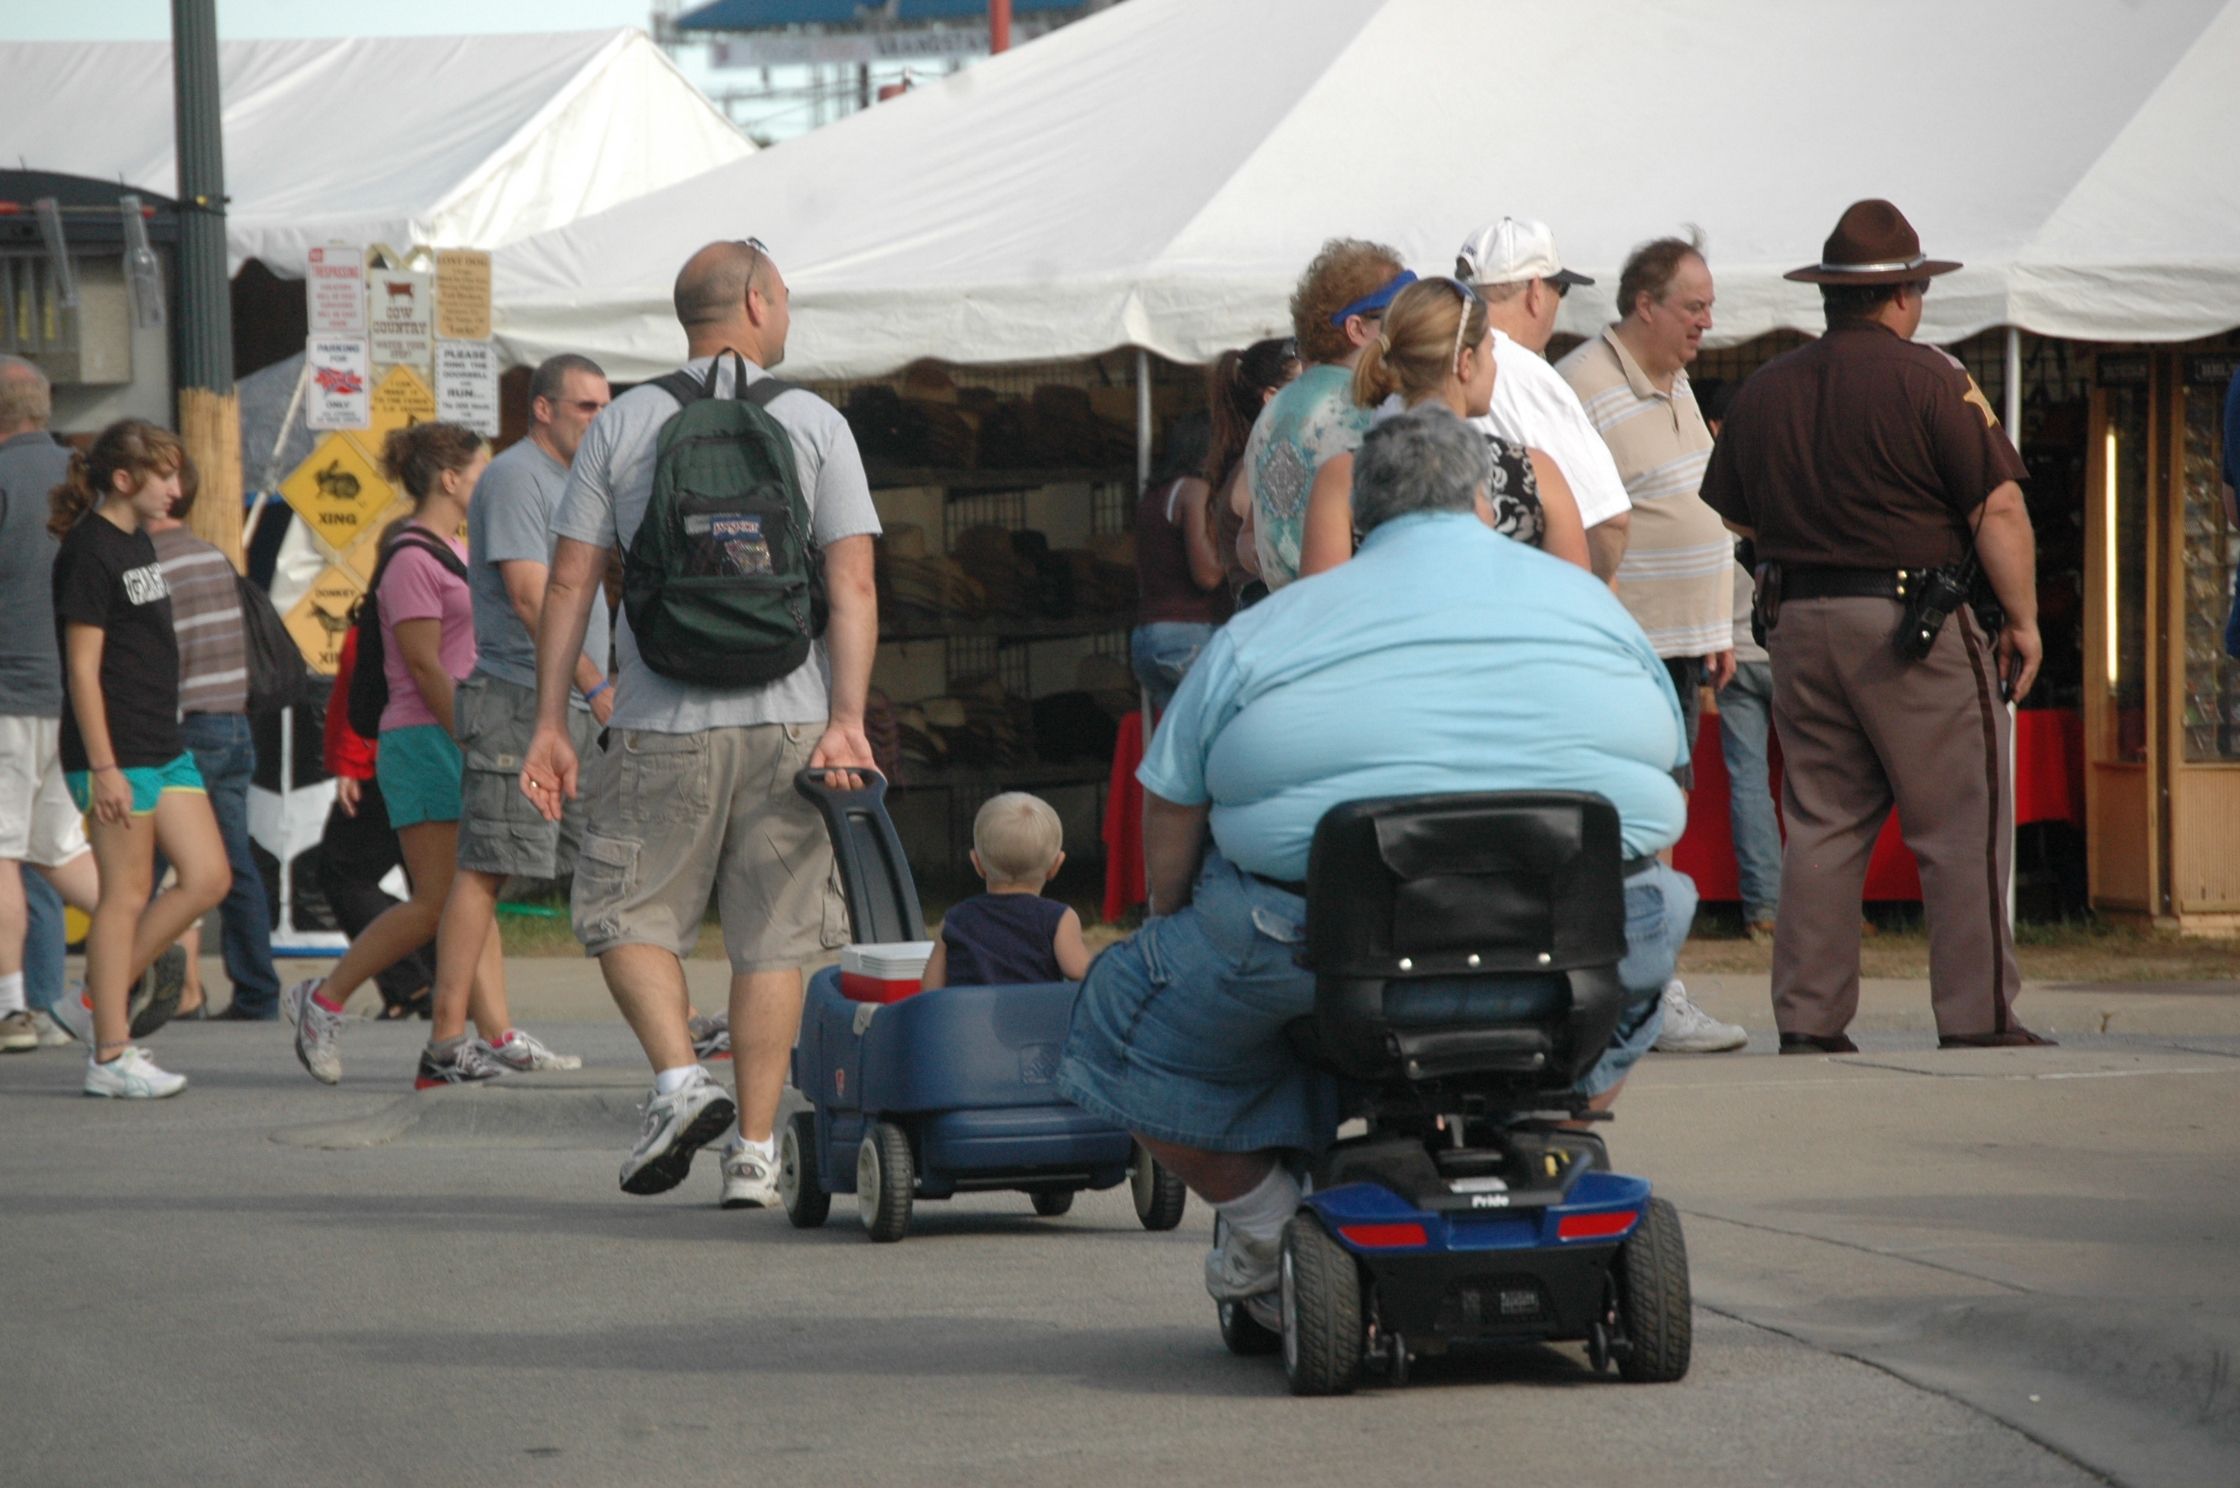 America's Obesity Epidemic Hits the Poor the Hardest